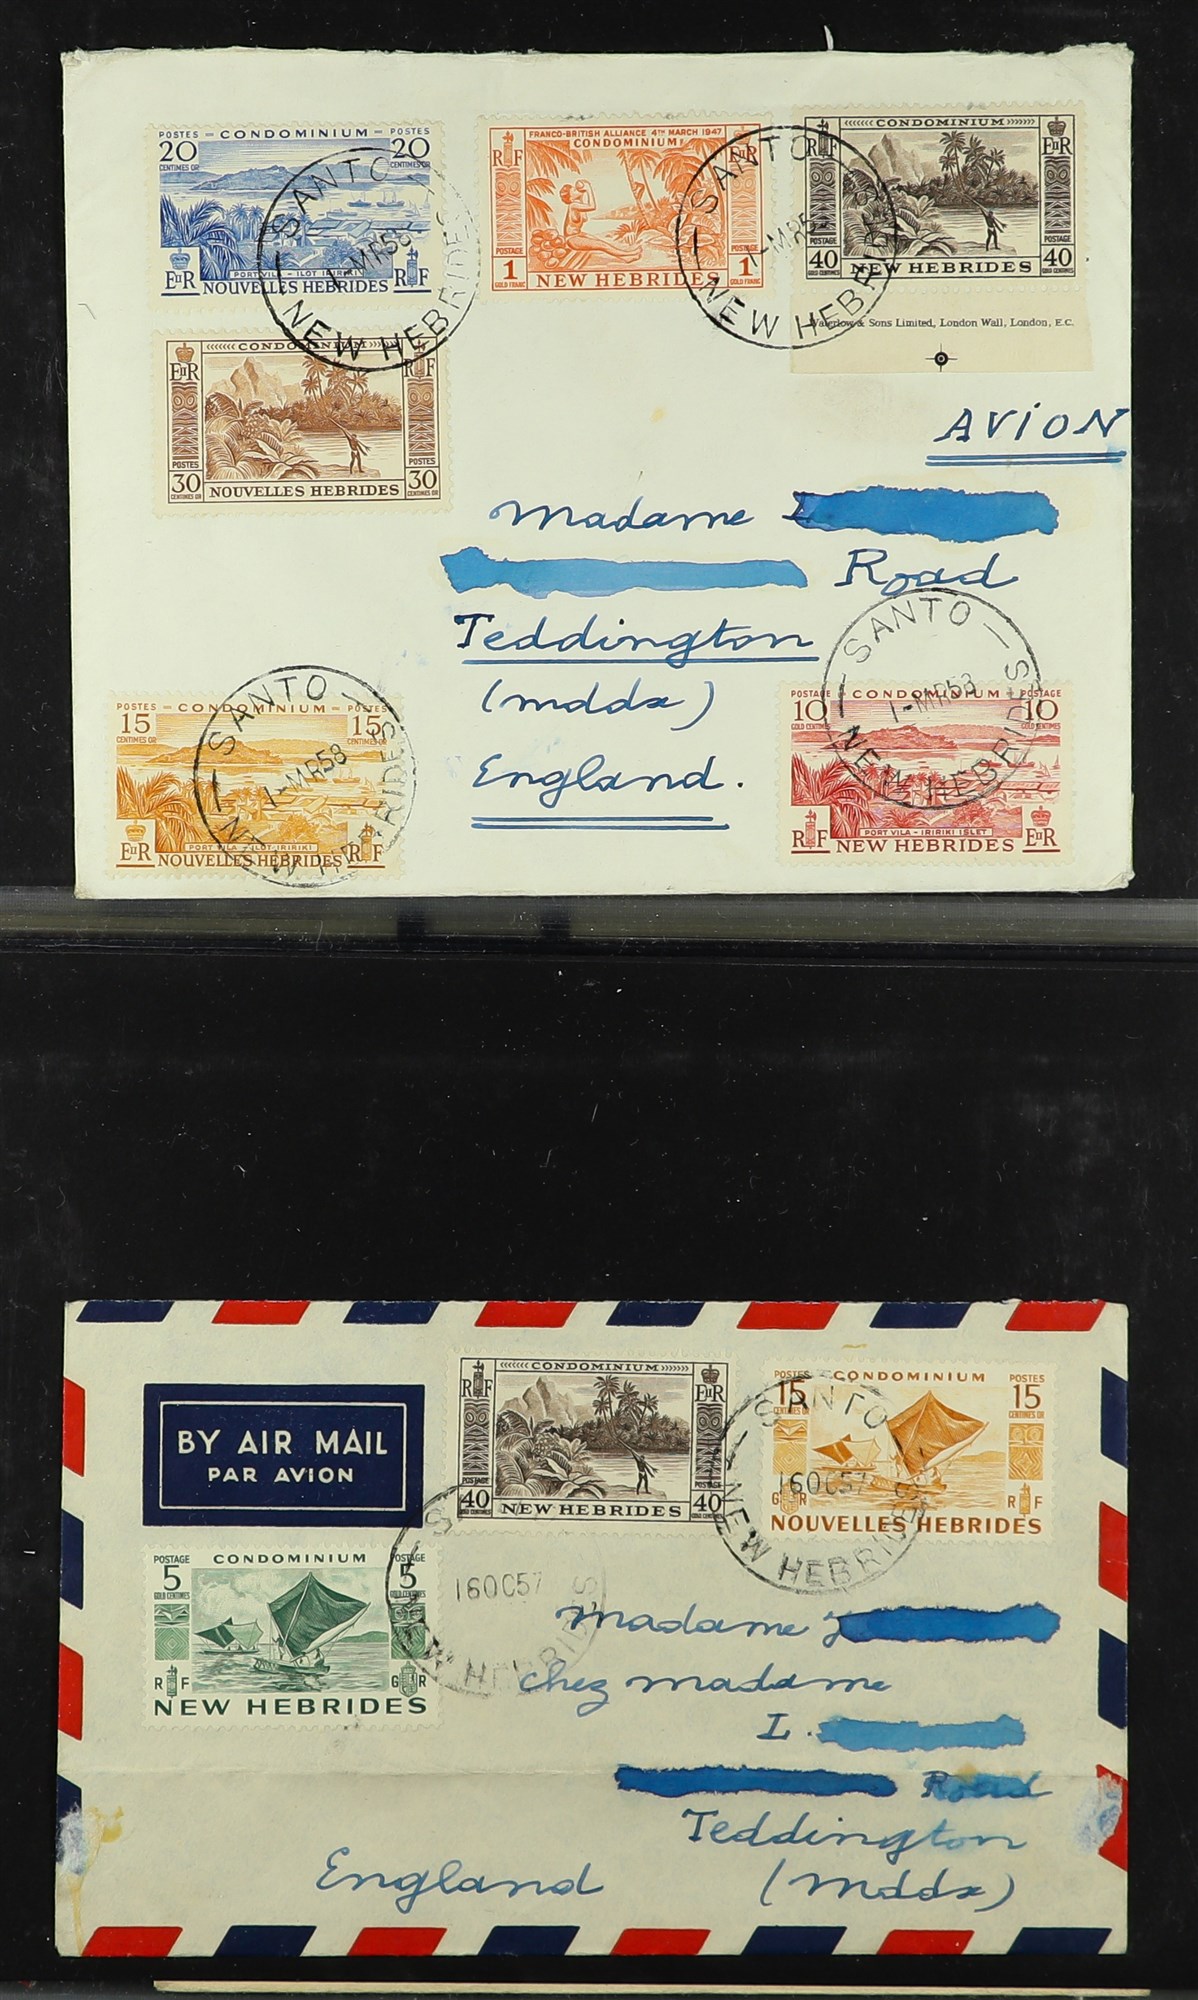 NEW HEBRIDES ENGLISH 1953-69 covers collection, with commercial & philatelic covers, registered - Image 4 of 15